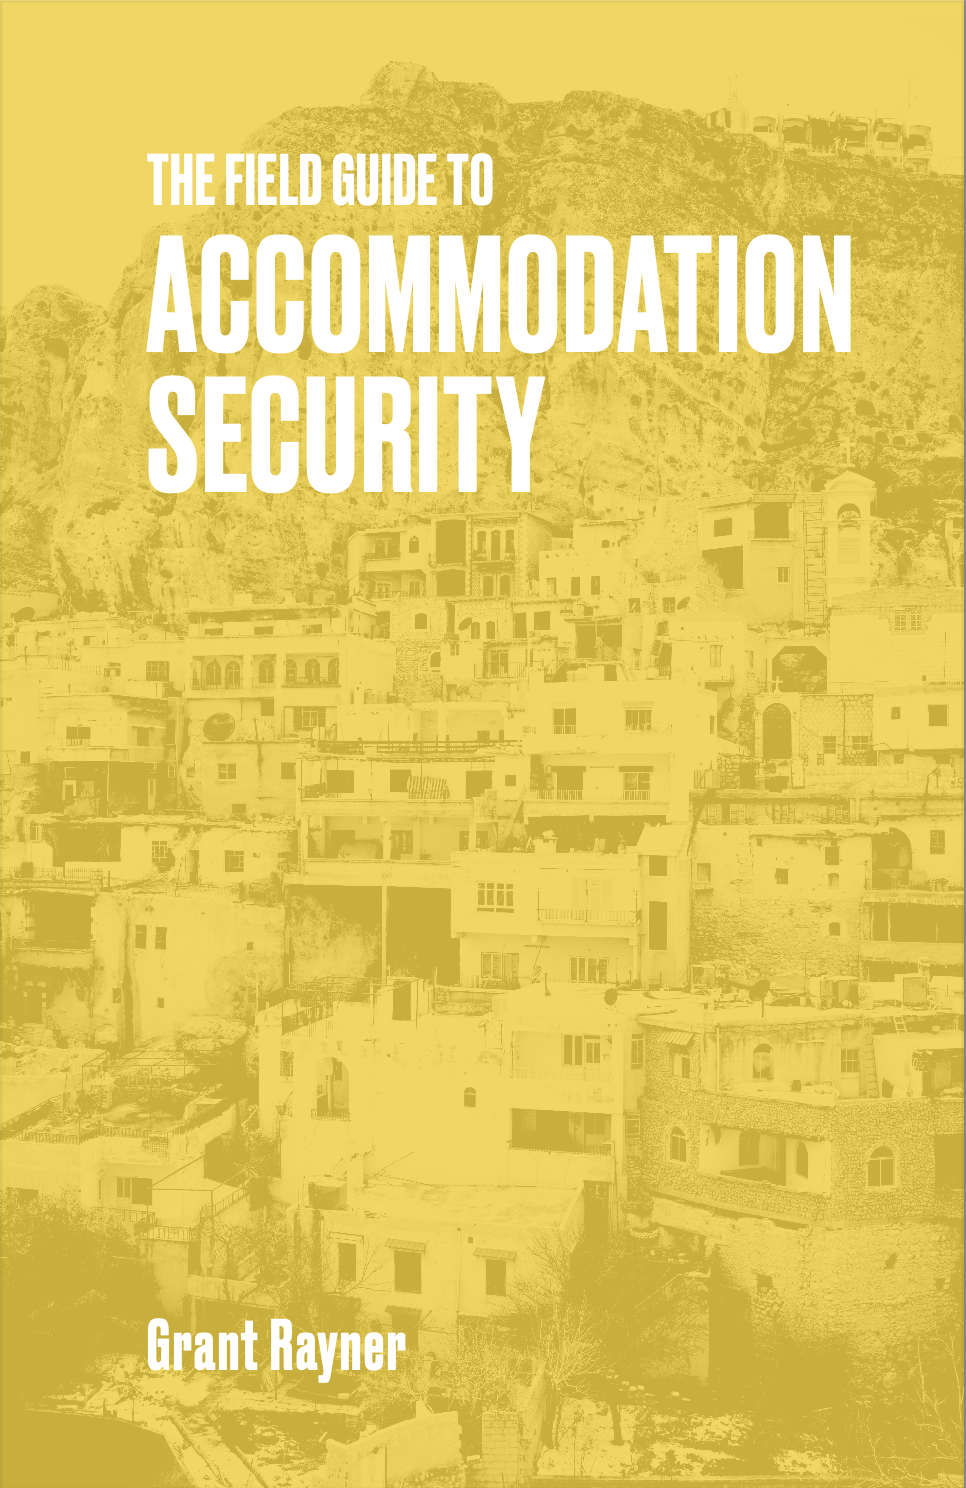 The Field Guide to Accommodation Security